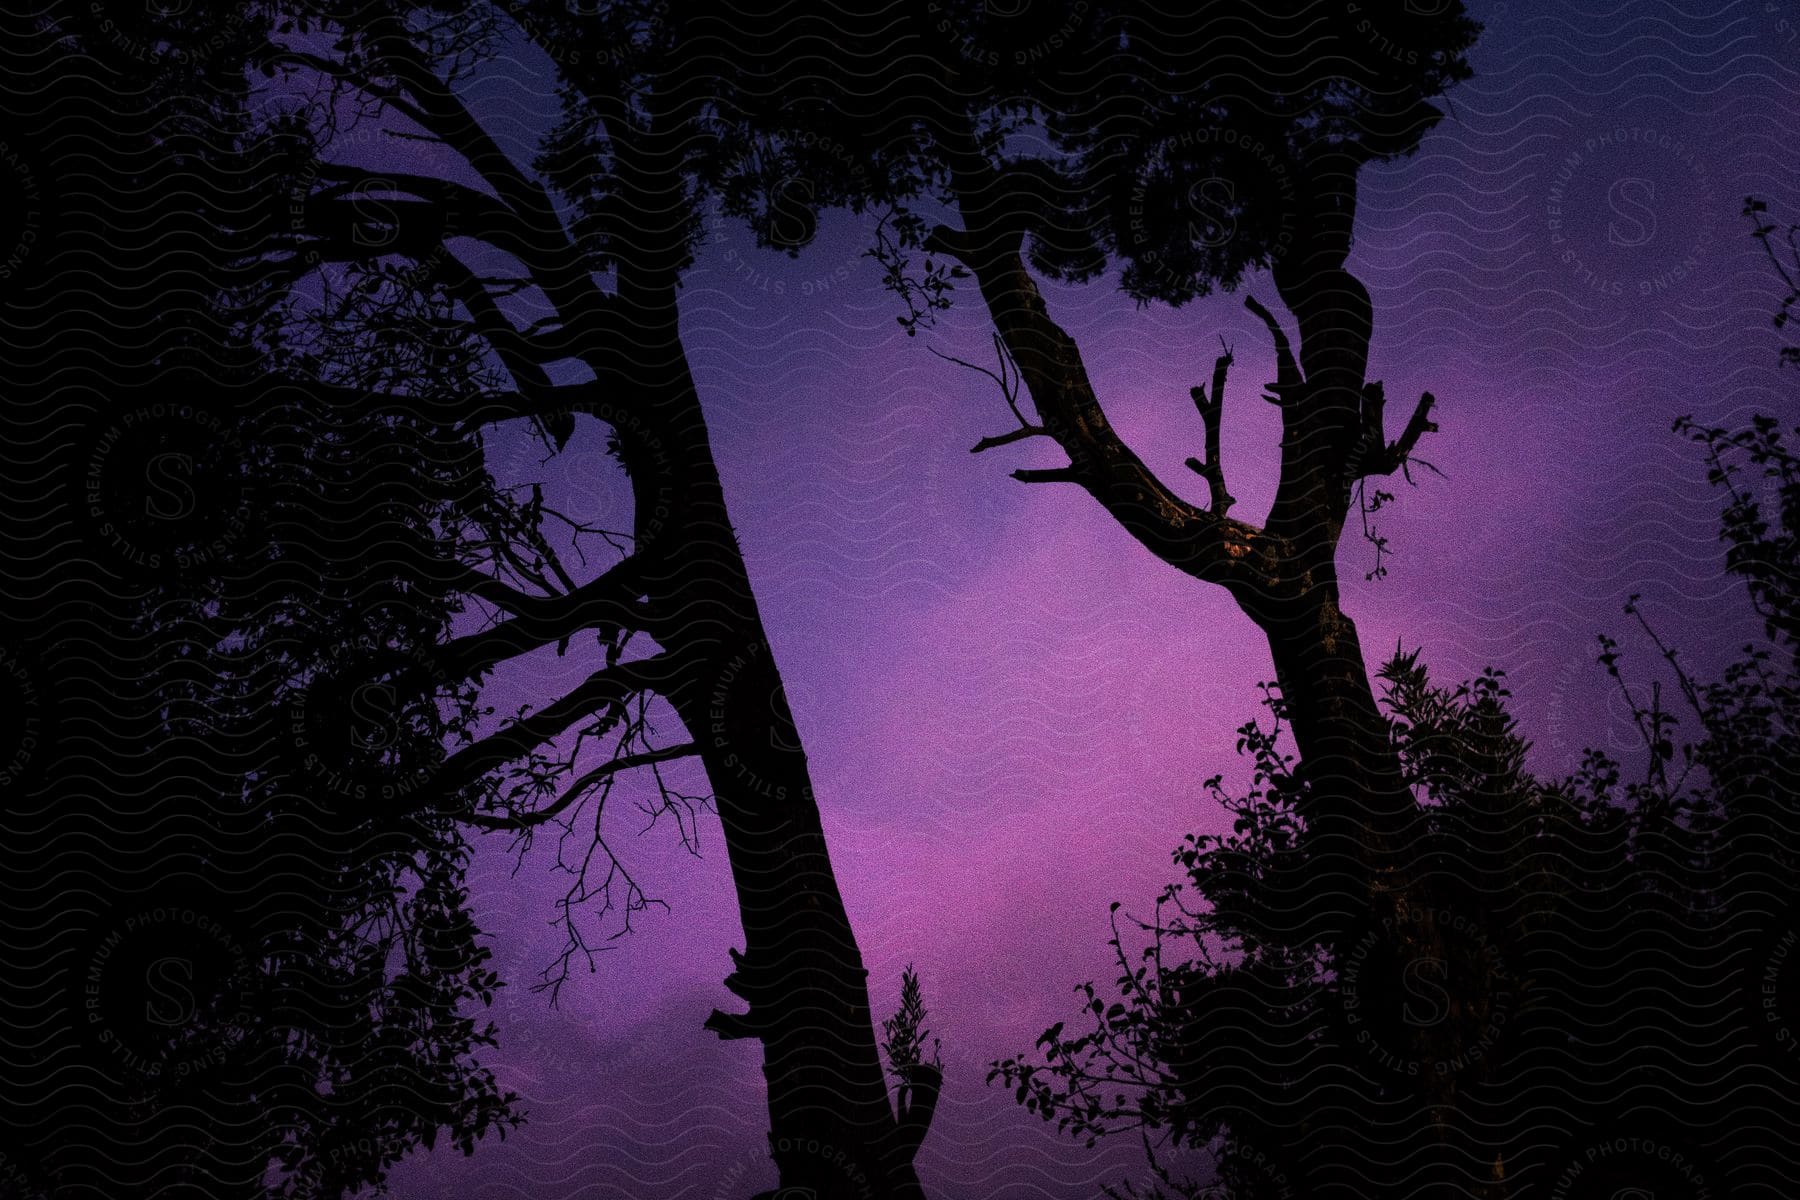 Silhouettes of trees outside of woods under a cloudy purple sunset sky